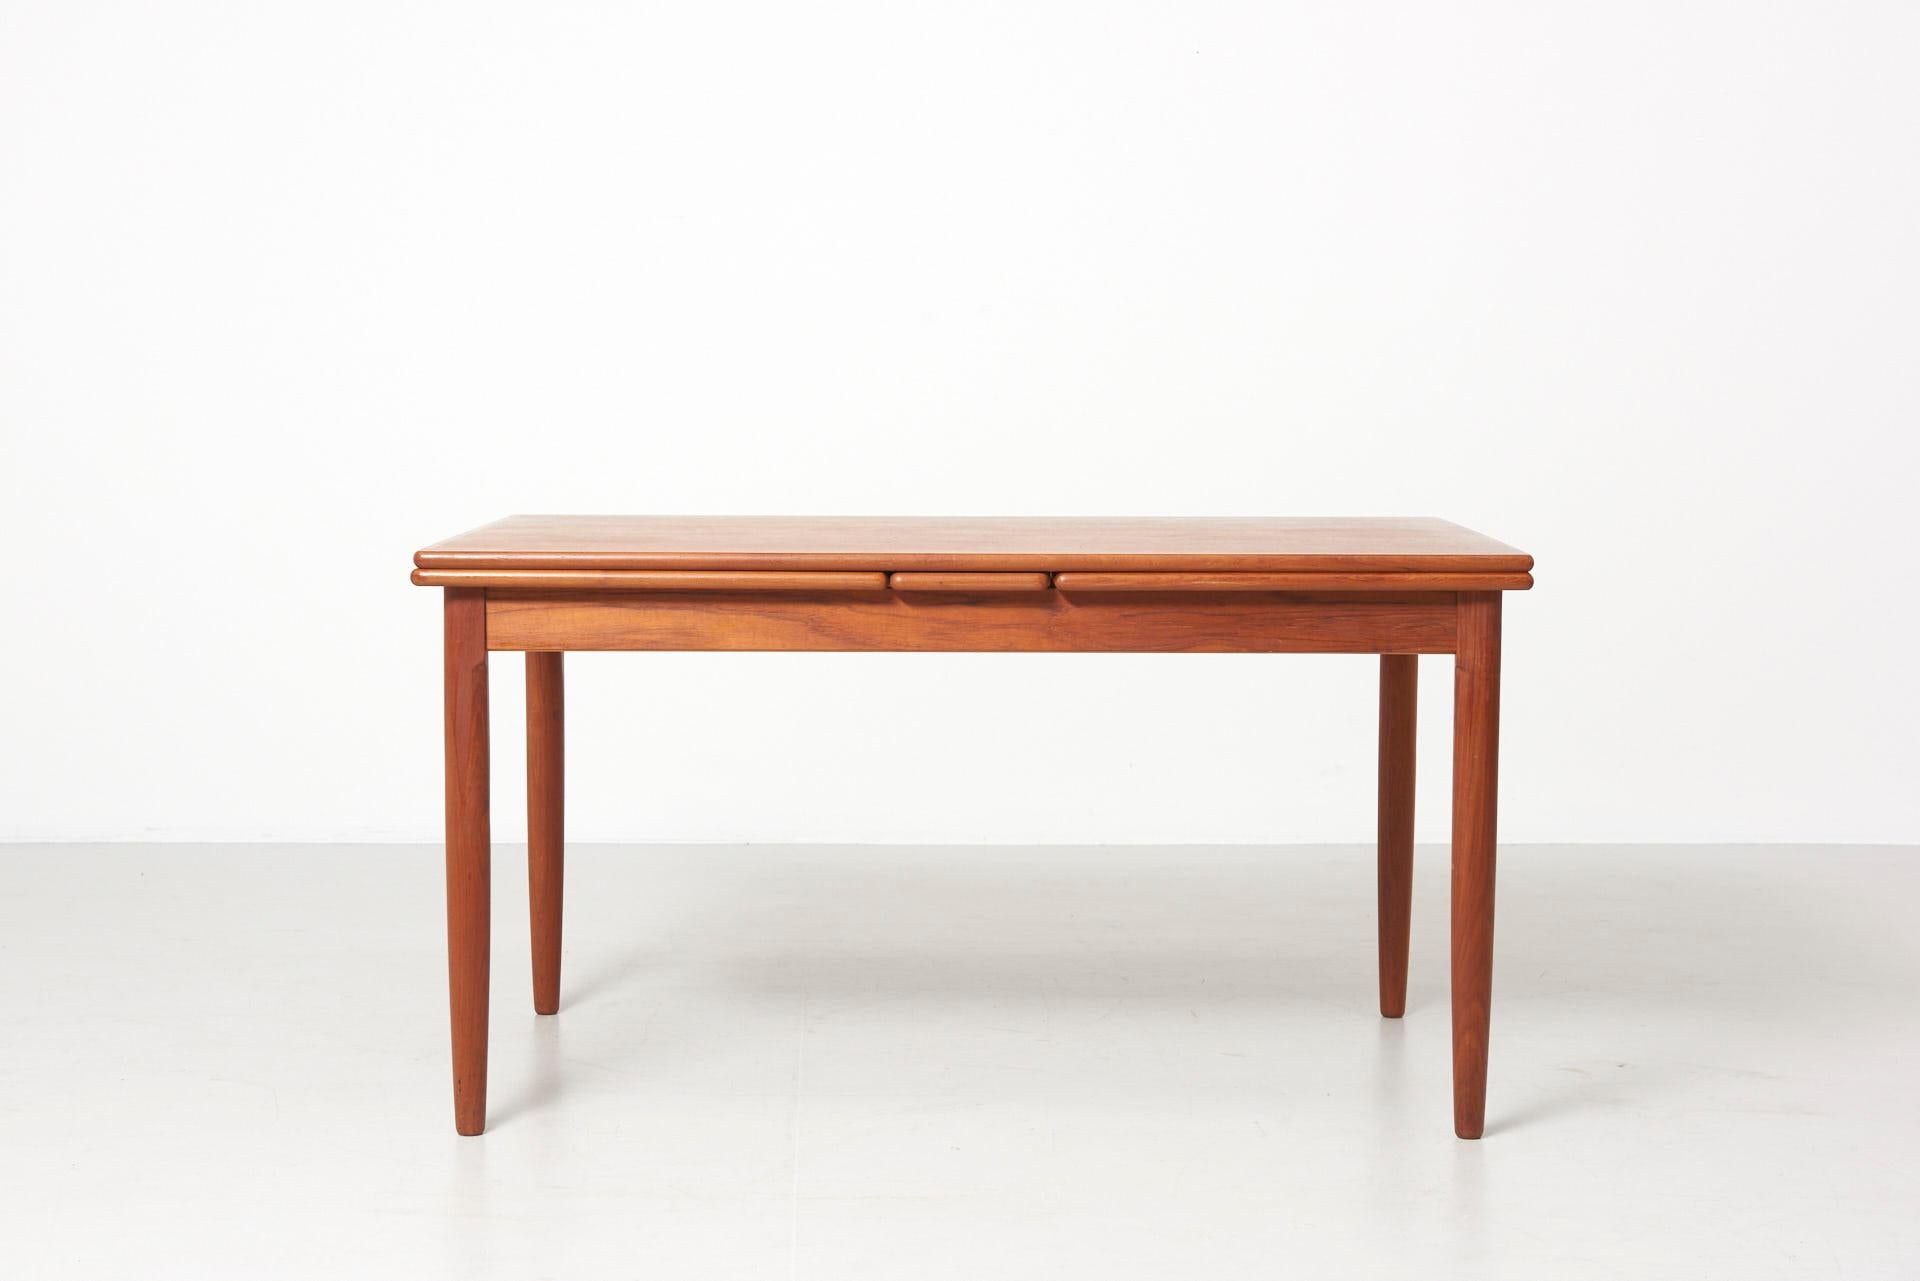 A dining table in teak with 2 pullout / pull-out leaves of 60 cm each. Made in Denmark.